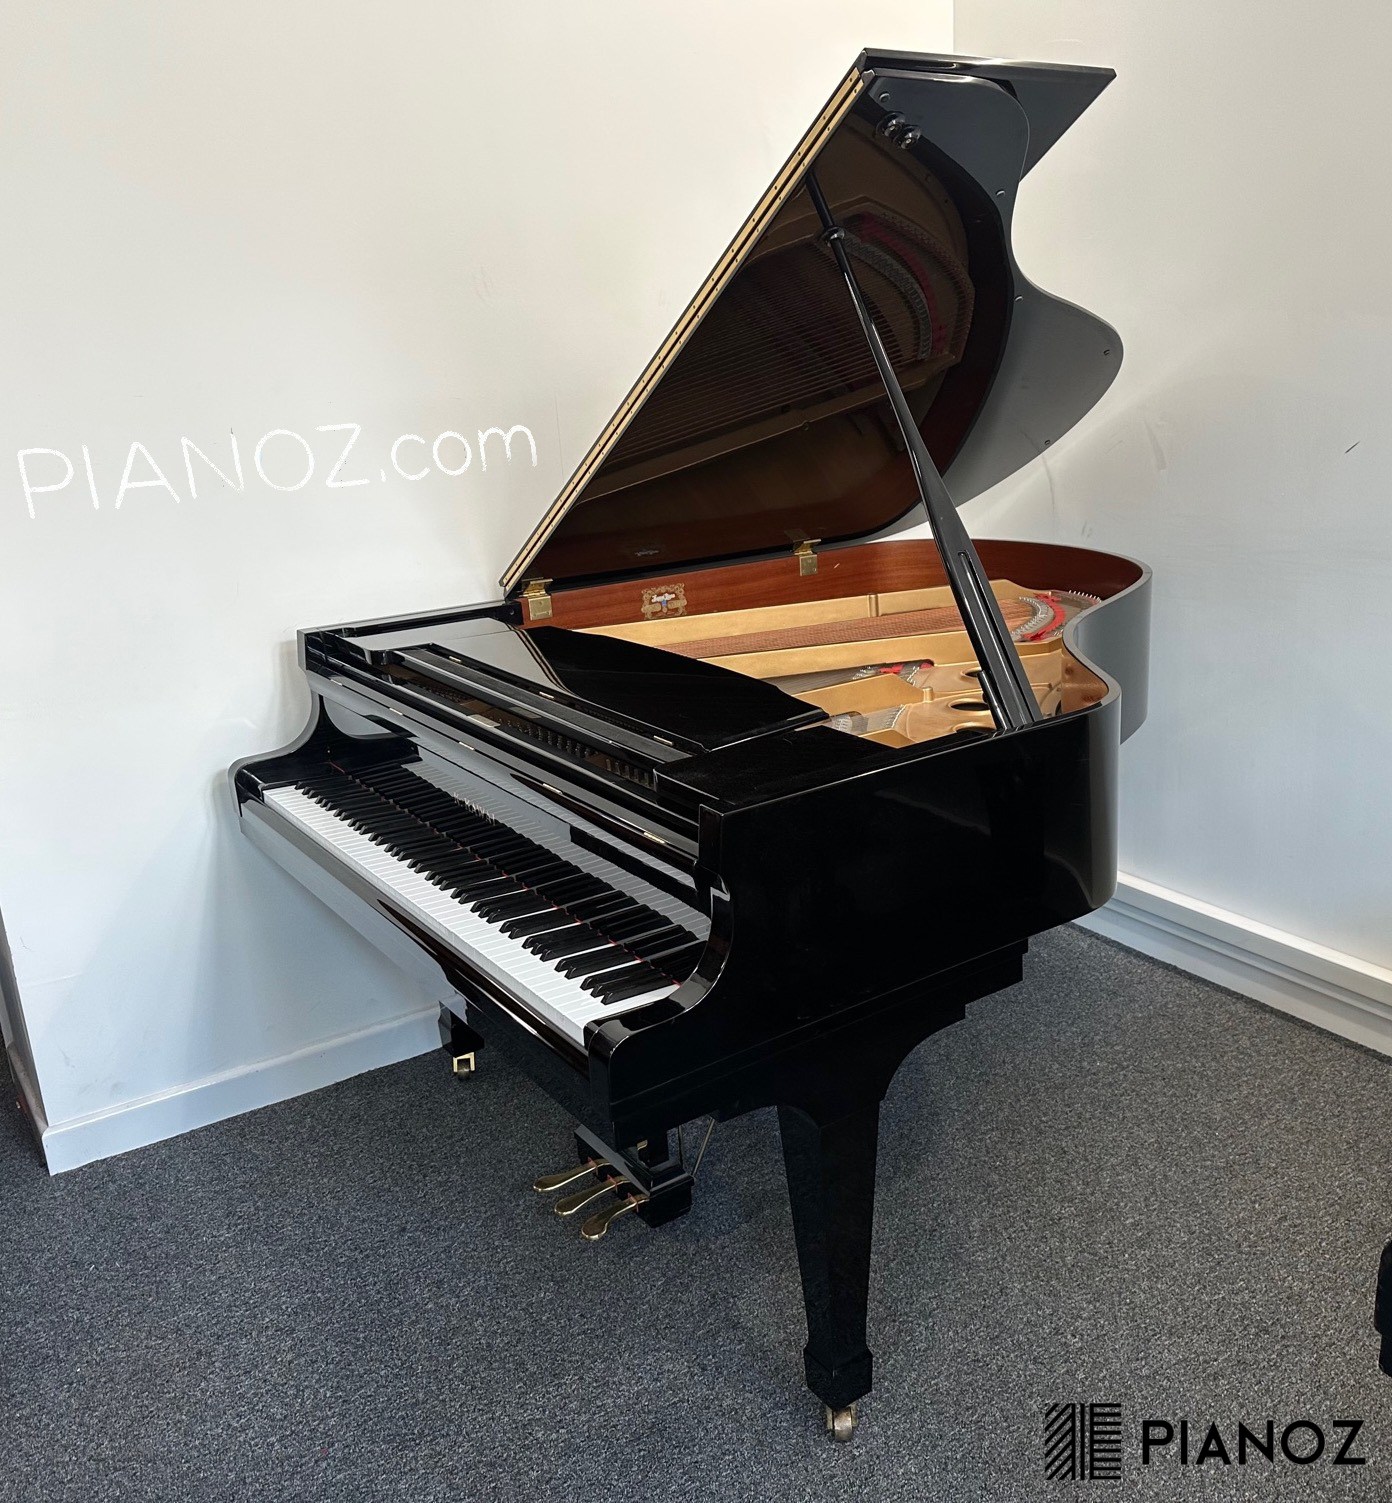 Kawai GS30 Japanese Grand Piano piano for sale in UK